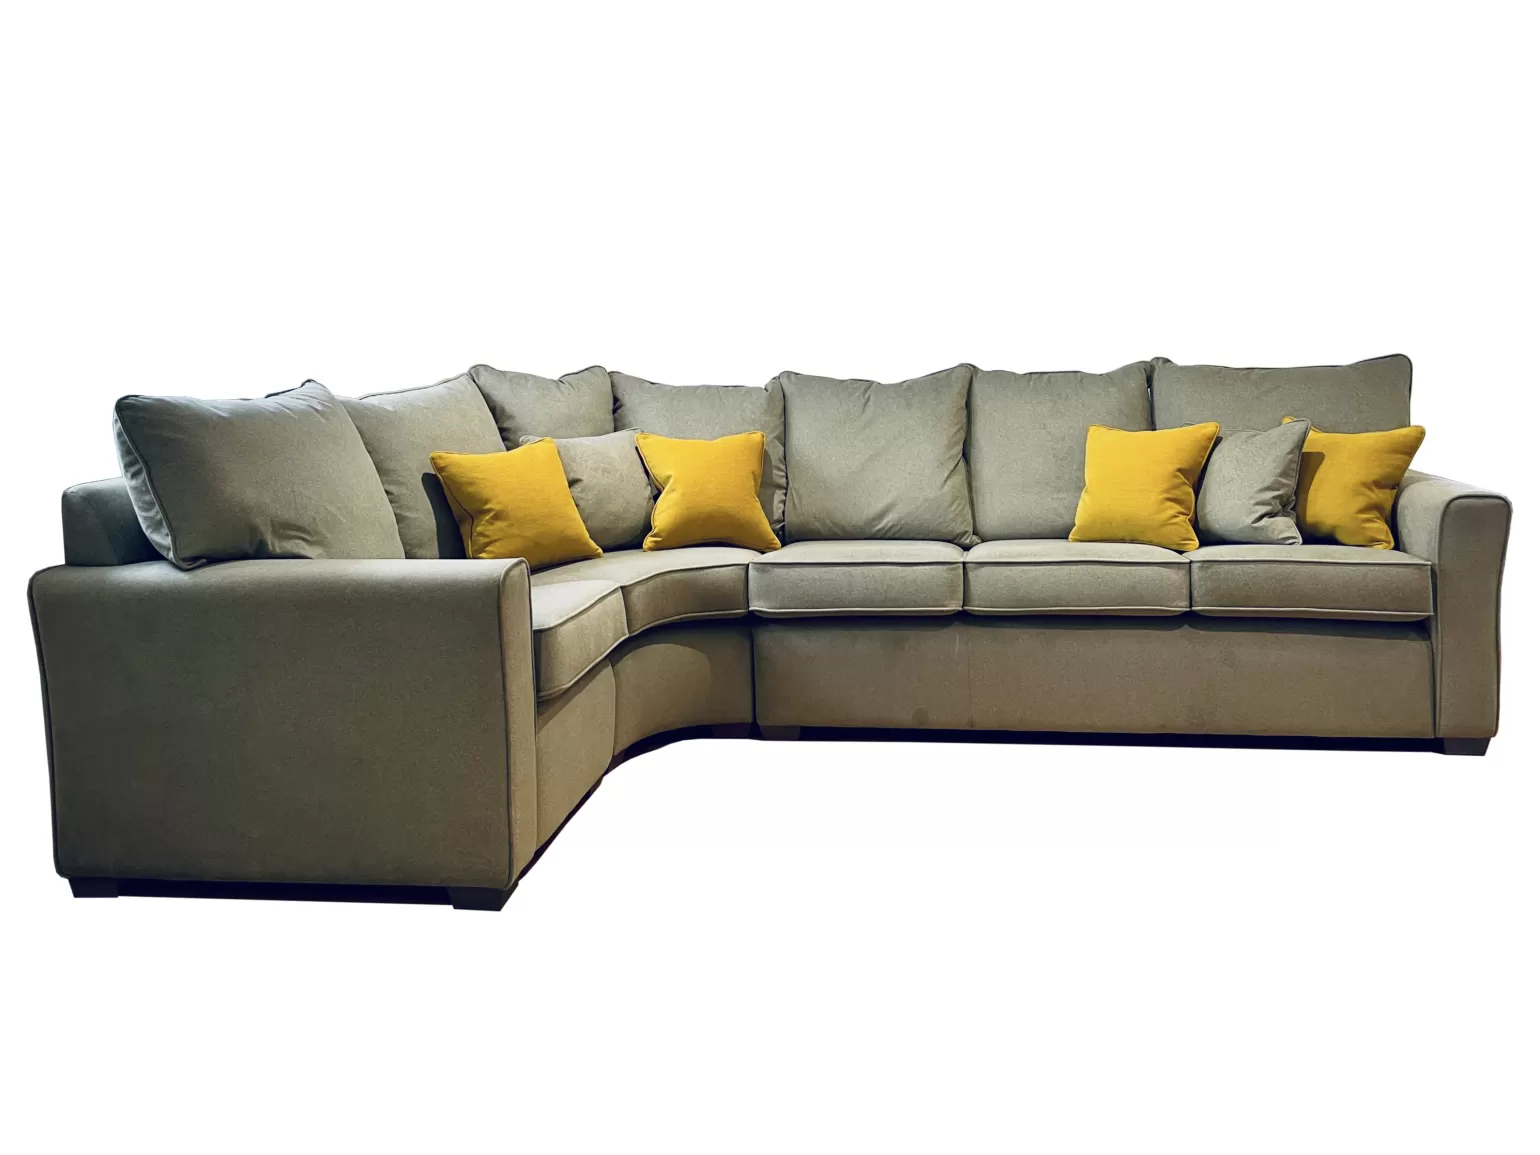 With a simple square shaped arm, this range of sofas and chairs lends itself to be a modern design. The back cushions are high, and the seat is deep, offering great comfort with a timeless yet modern look.
